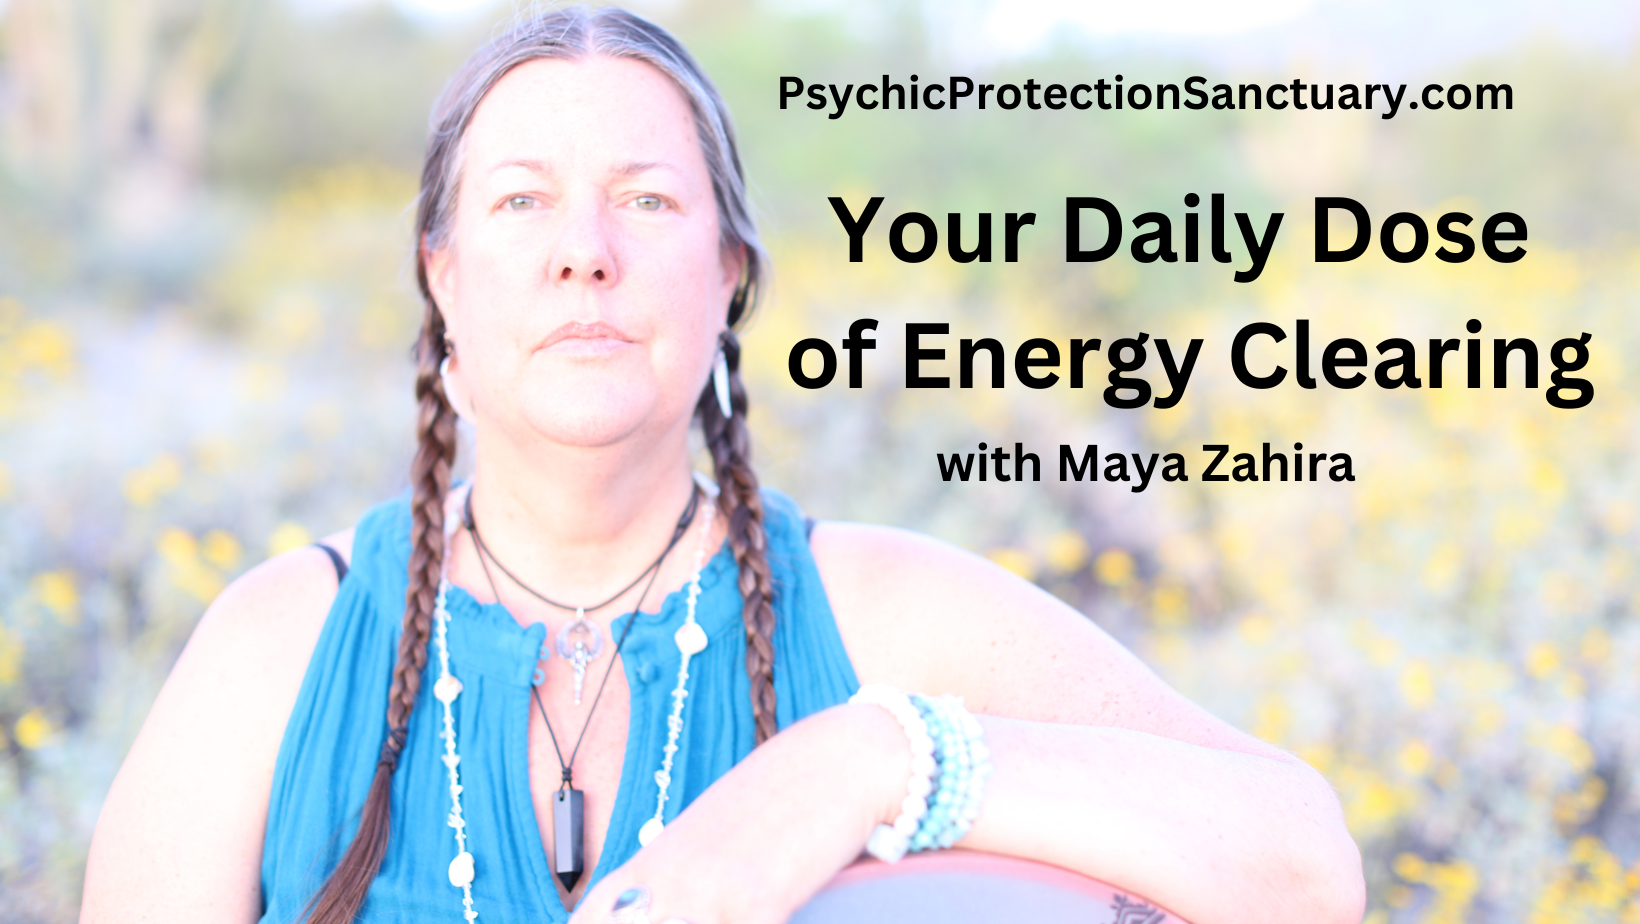 Energy Clearing, energy balancing, energy healing, Reiki for psychic protection, psychic attack, and spiritual empowerment with Maya Zahira